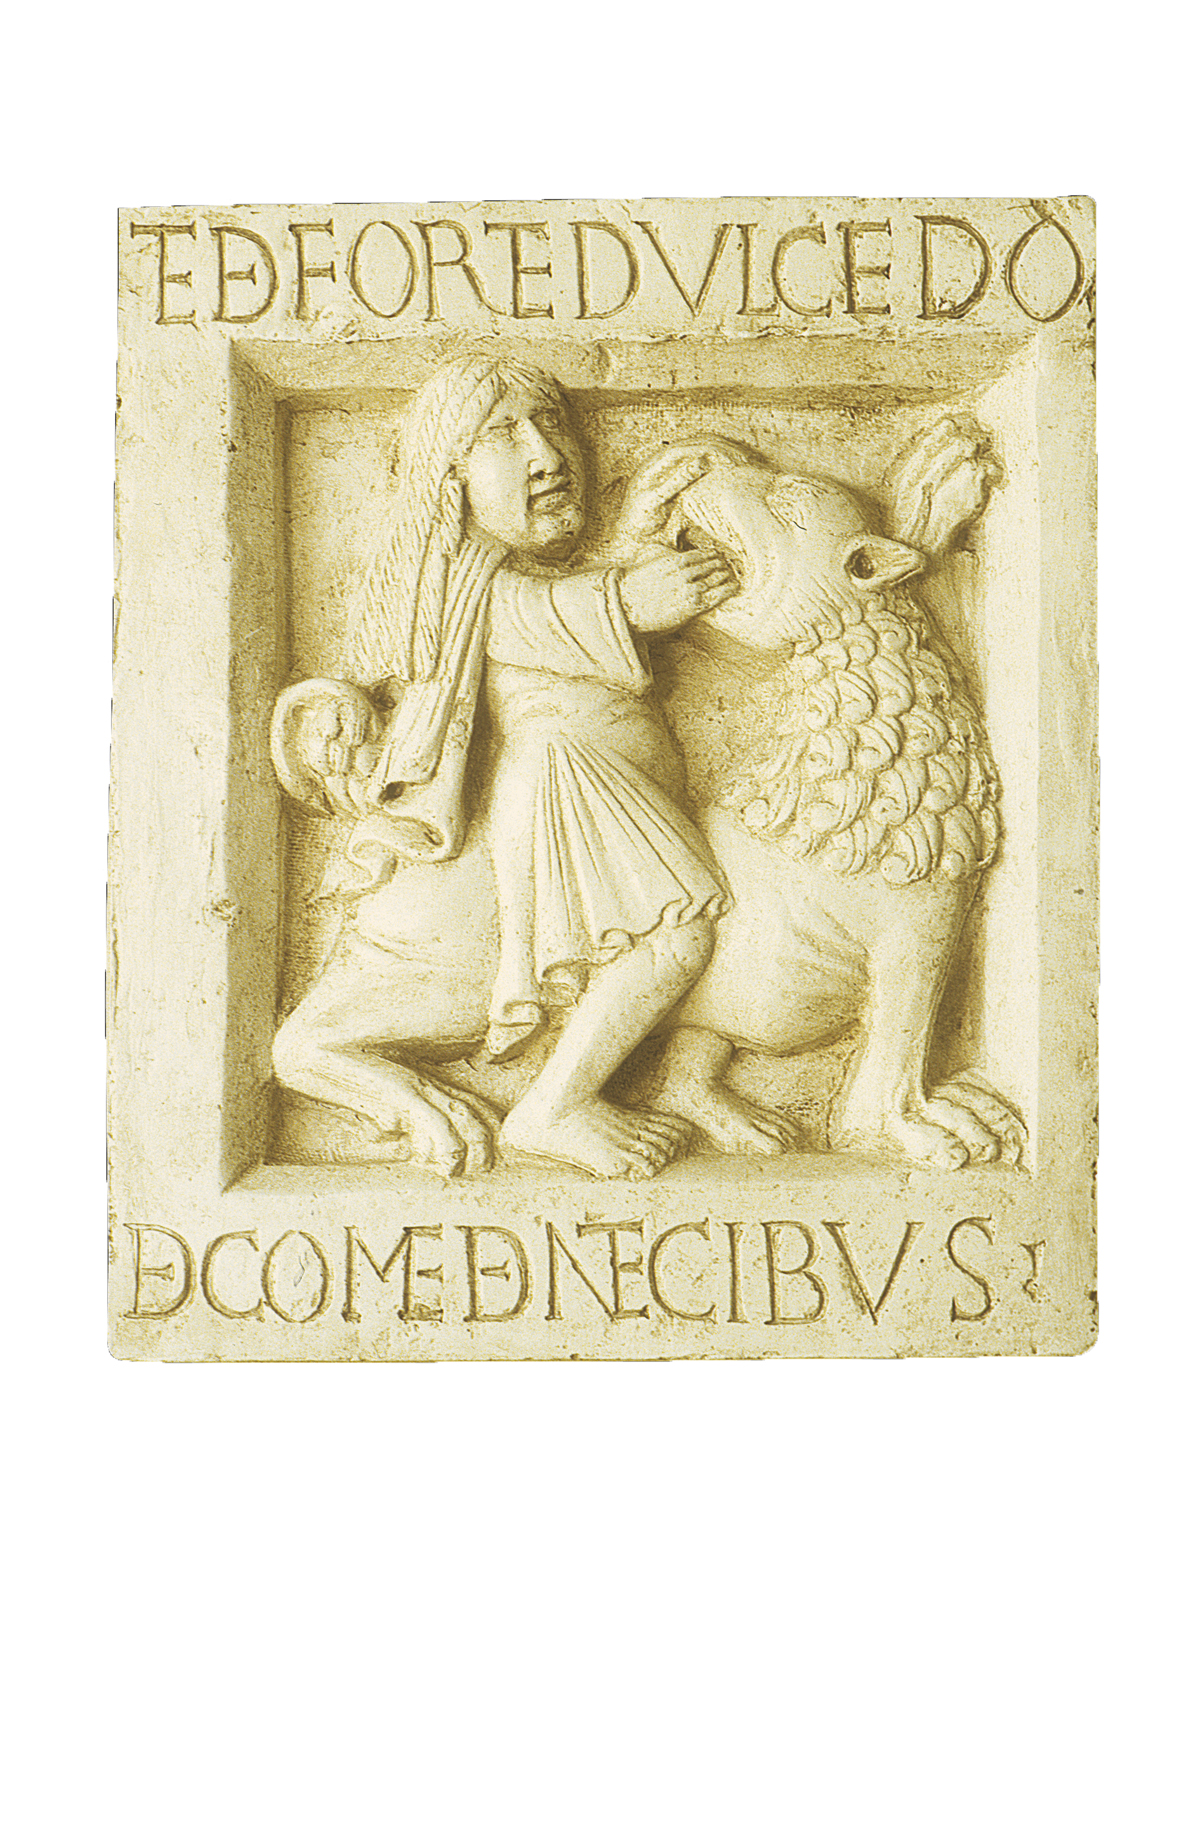 Samson riding a lion, a carved panel from the portal of Nonantola Abbey